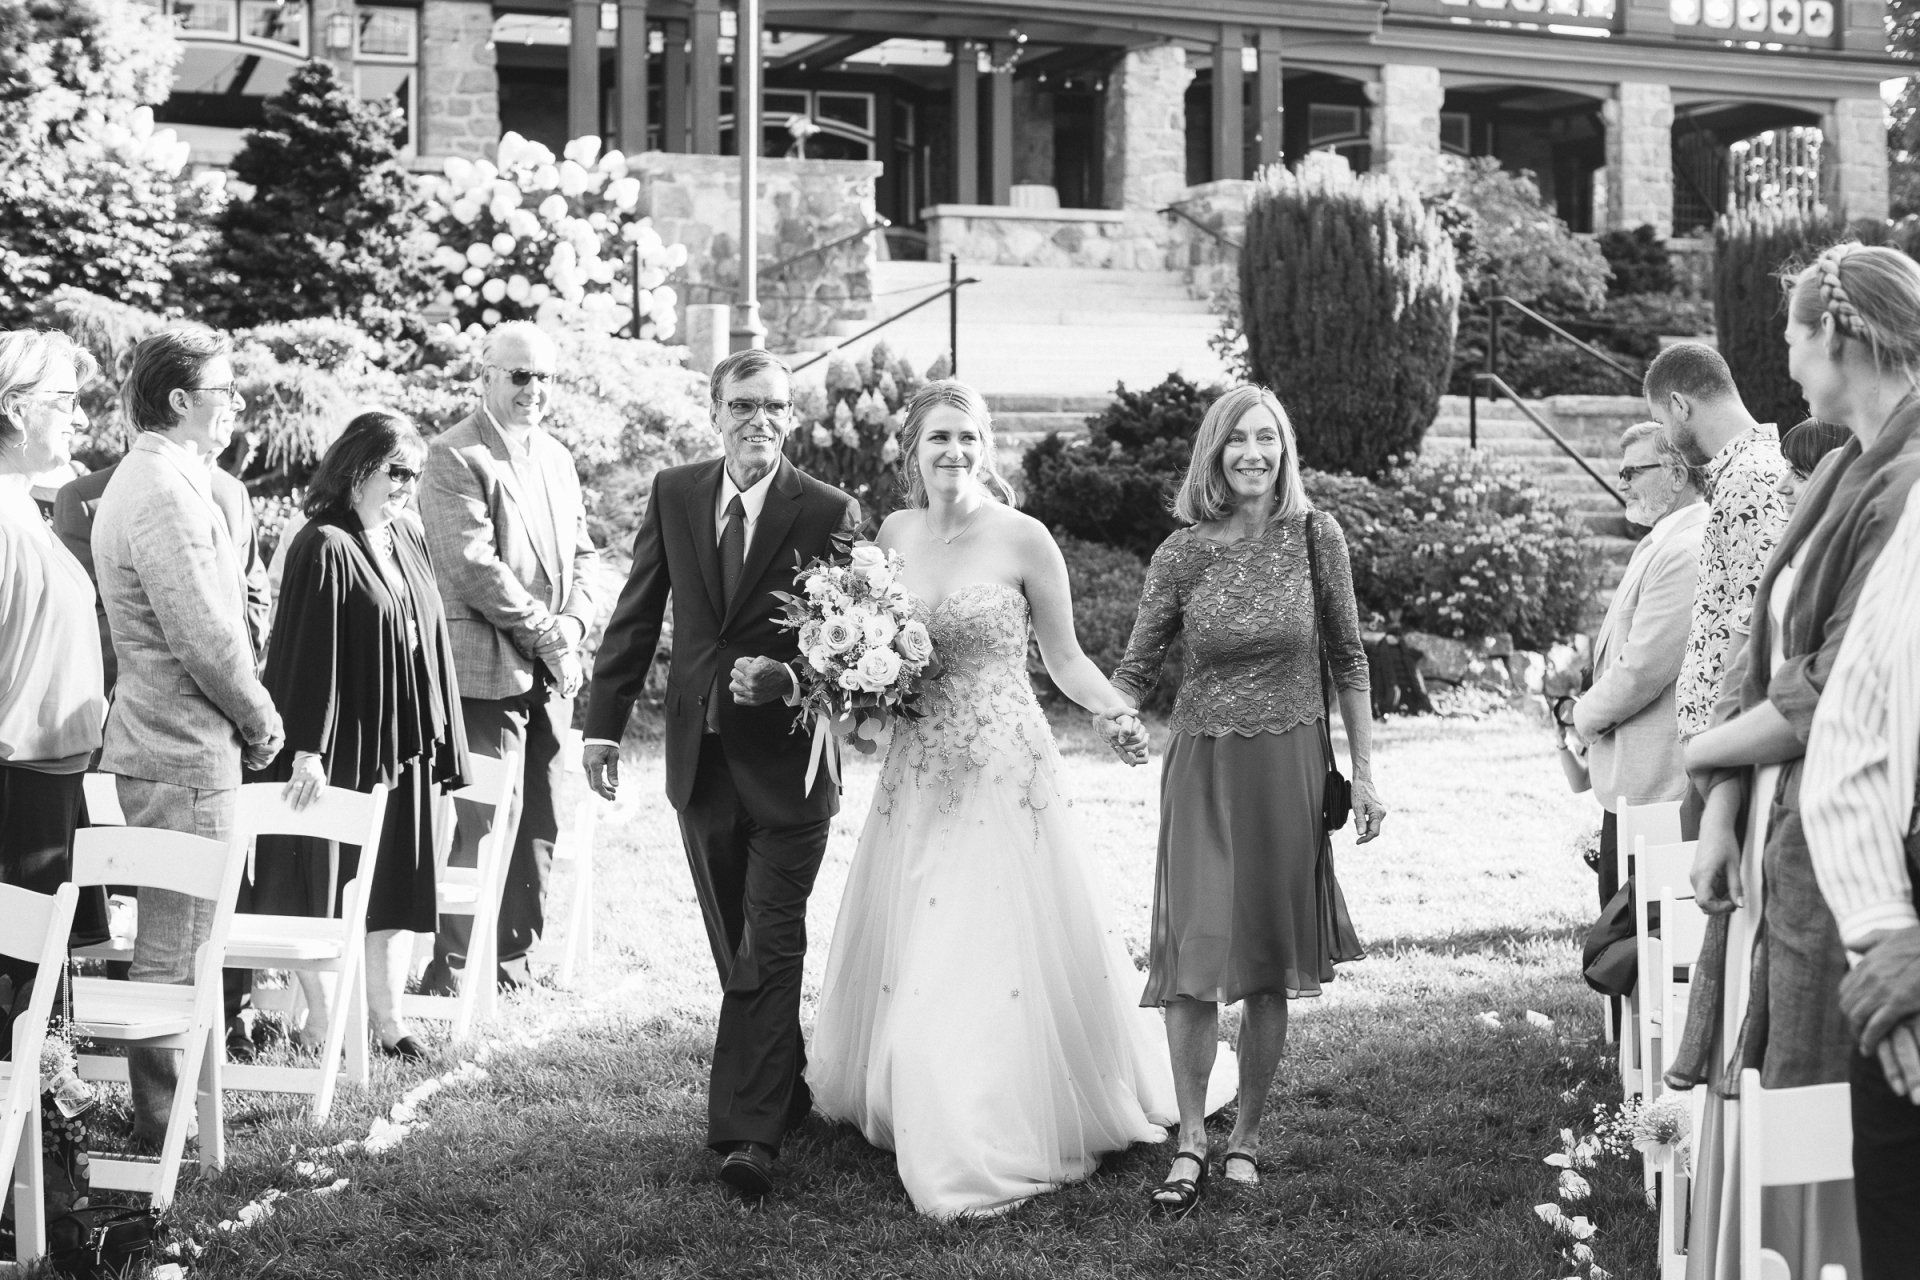 Outdoor wedding - Bride walking down the isle with her parents